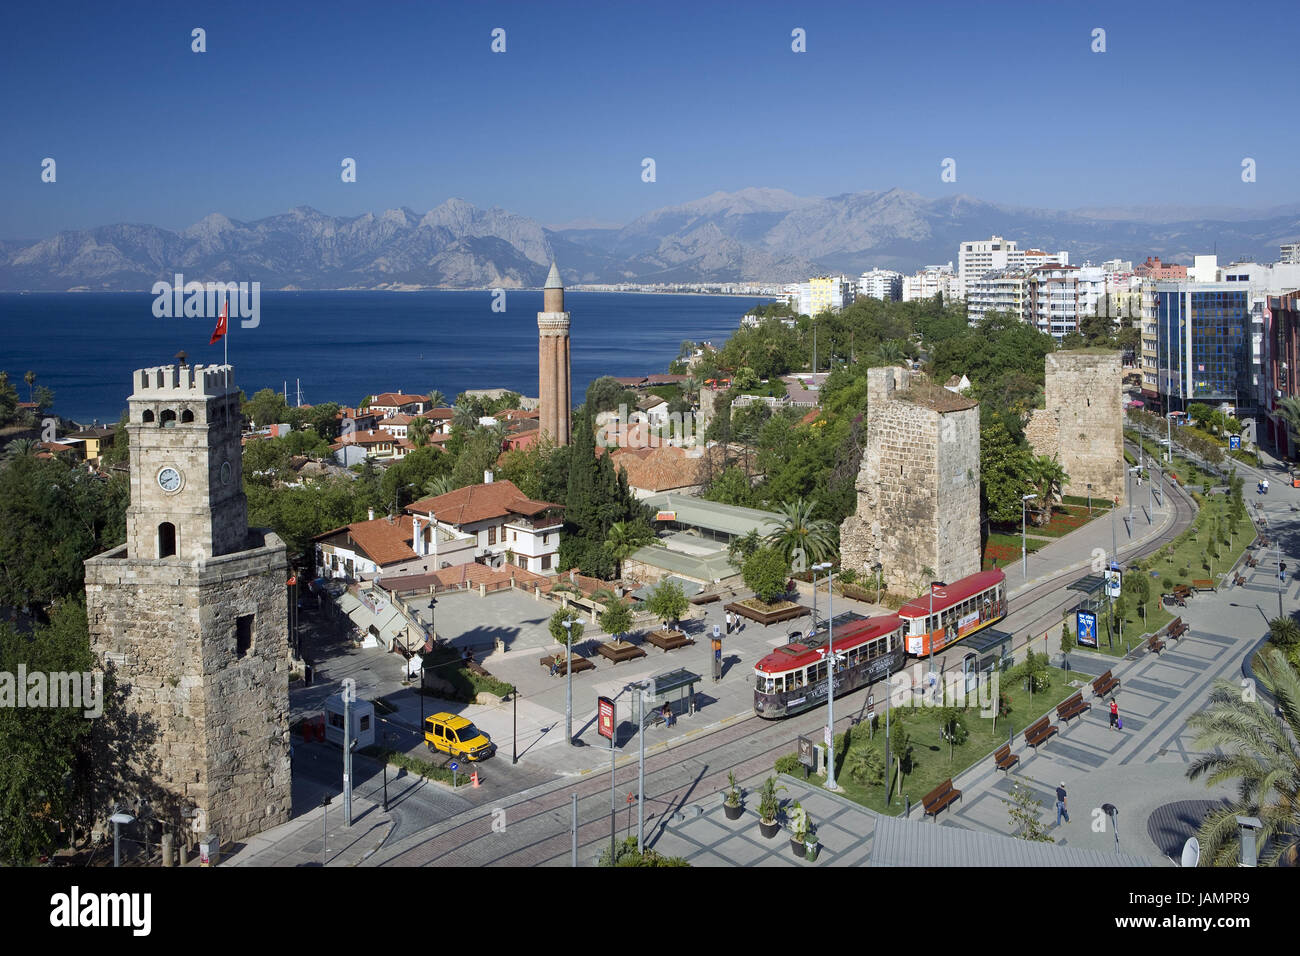 Turkey,Antalya,Old Town,sowing Kule,Kale Kapisi,Anatolia,town,centre,city centre,structure,towers,clock tower,architecture,places of interest,culture,sea,view,mountains,fort,building,streetcar,tram, Stock Photo